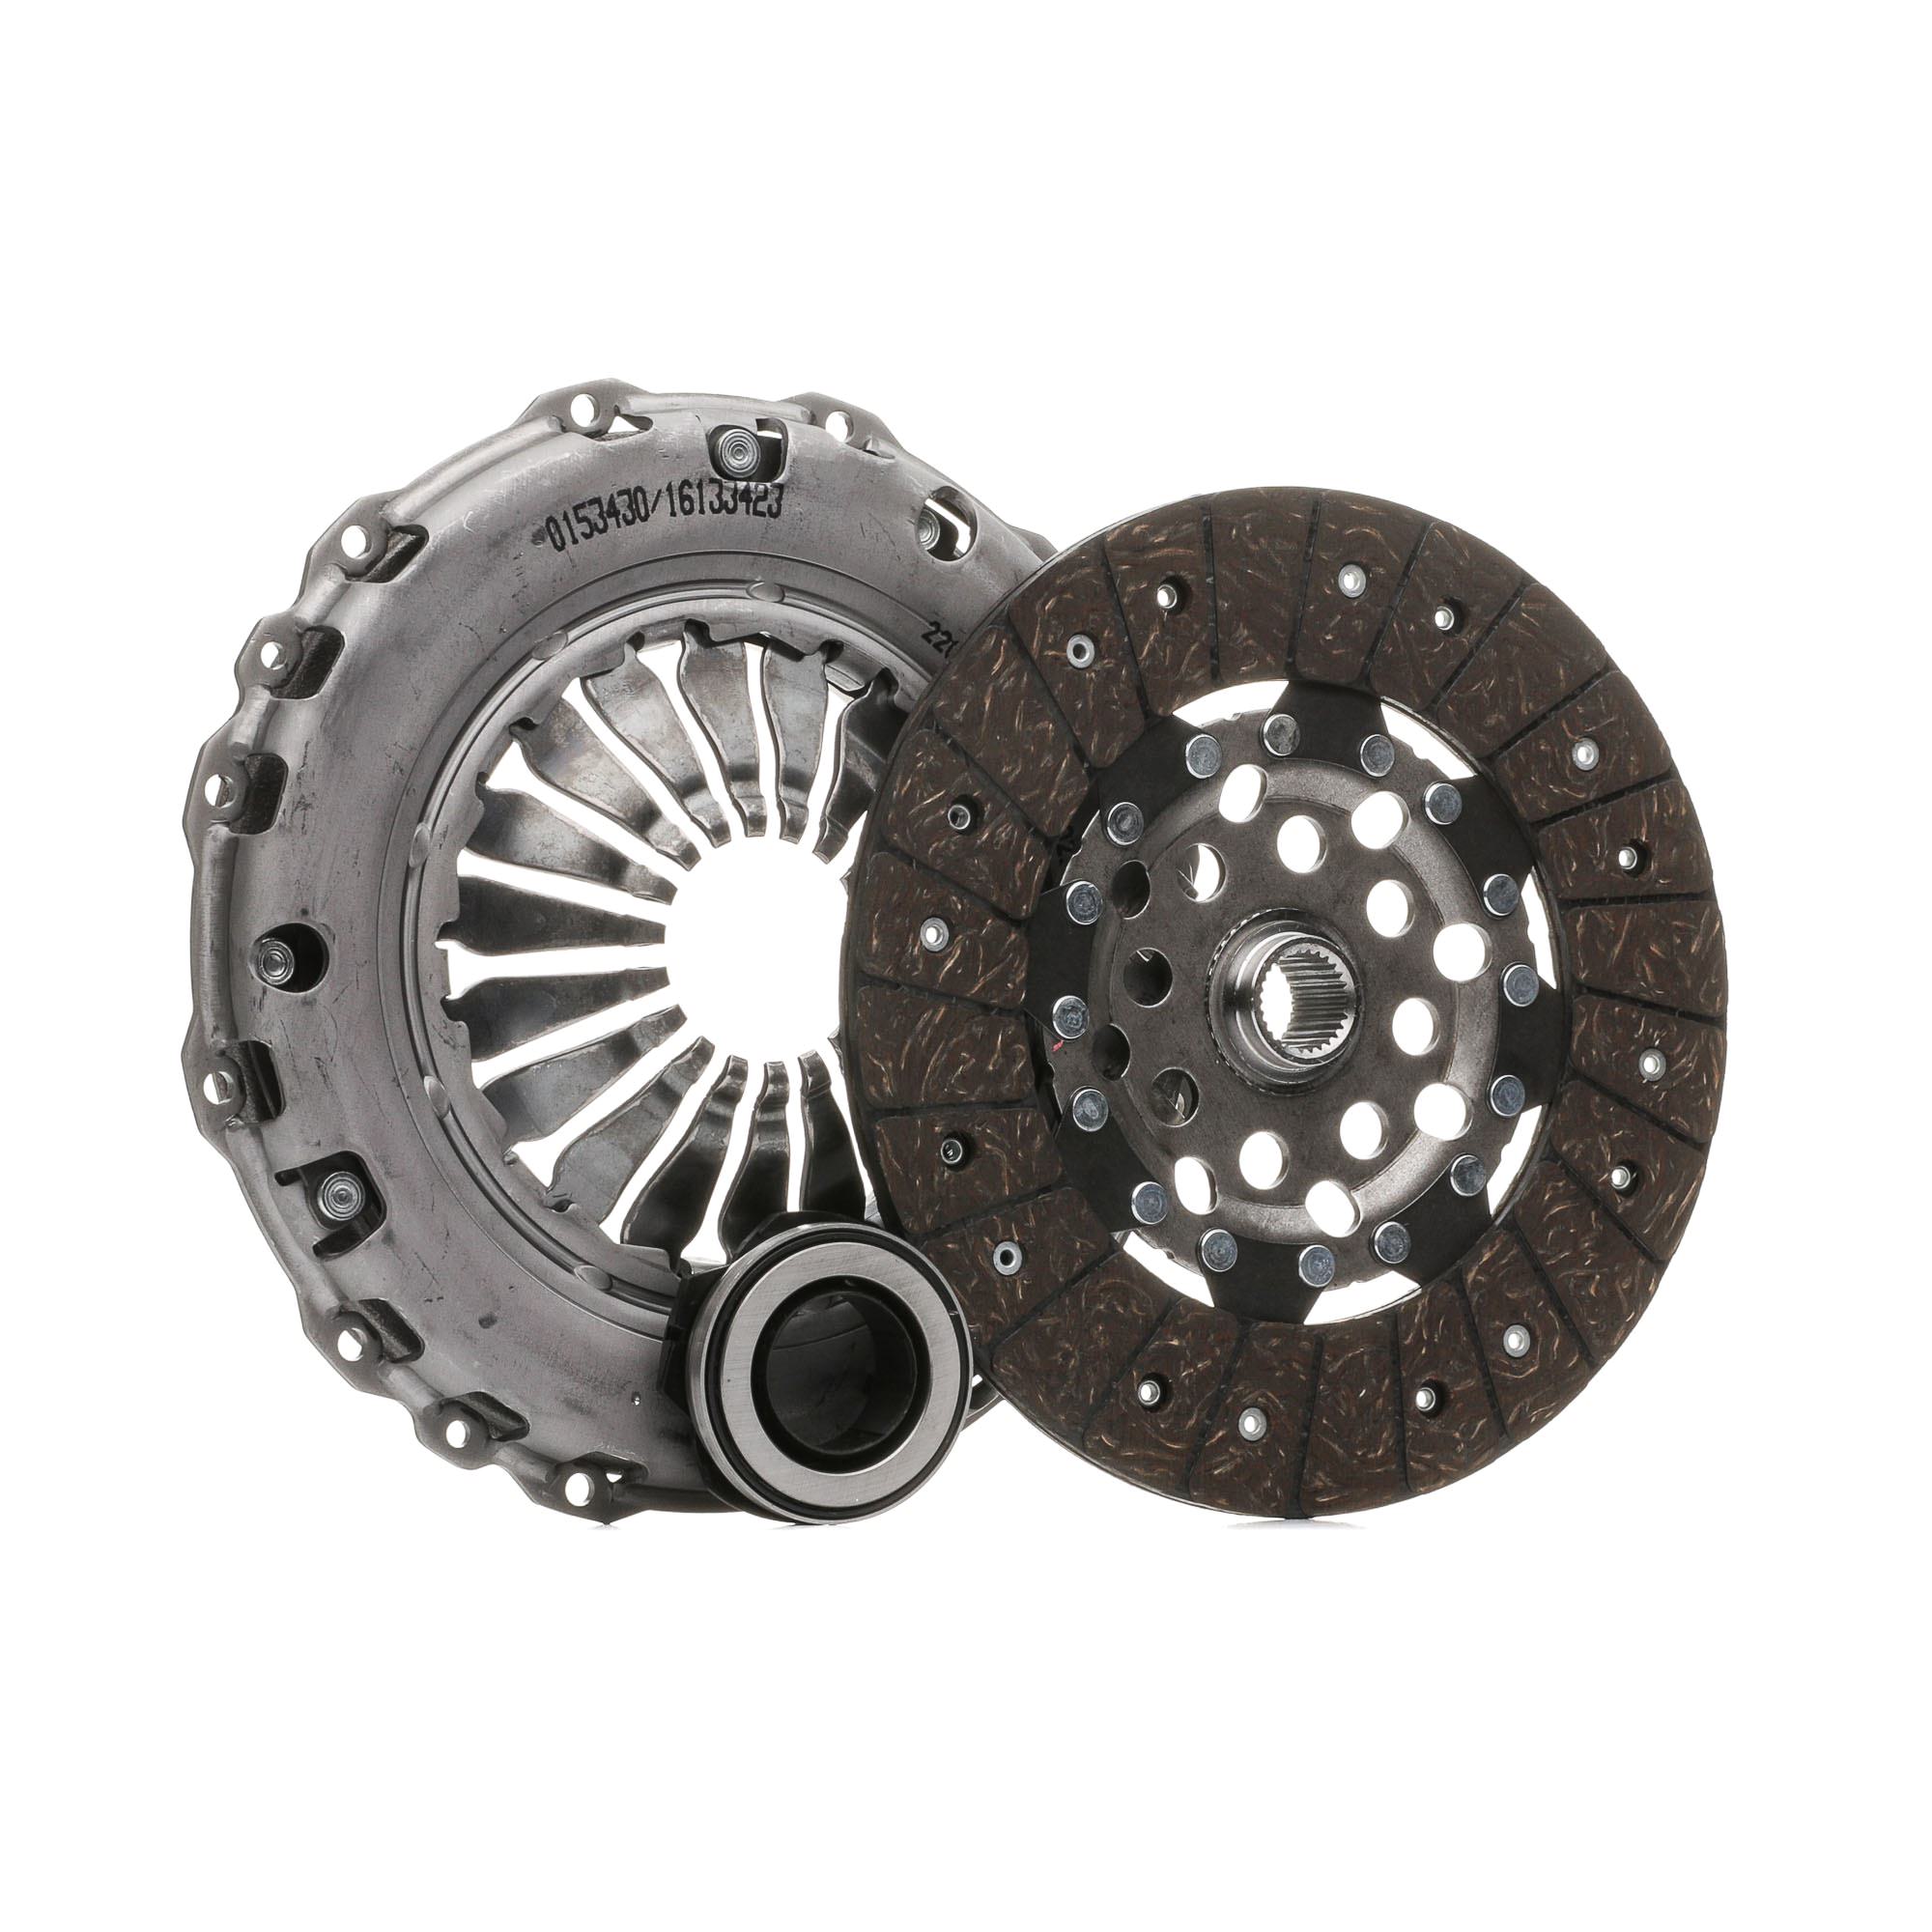 STARK SKCK-0101304 Clutch kit for engines with dual-mass flywheel, with clutch release bearing, with clutch disc, Check and replace dual-mass flywheel if necessary., 220mm